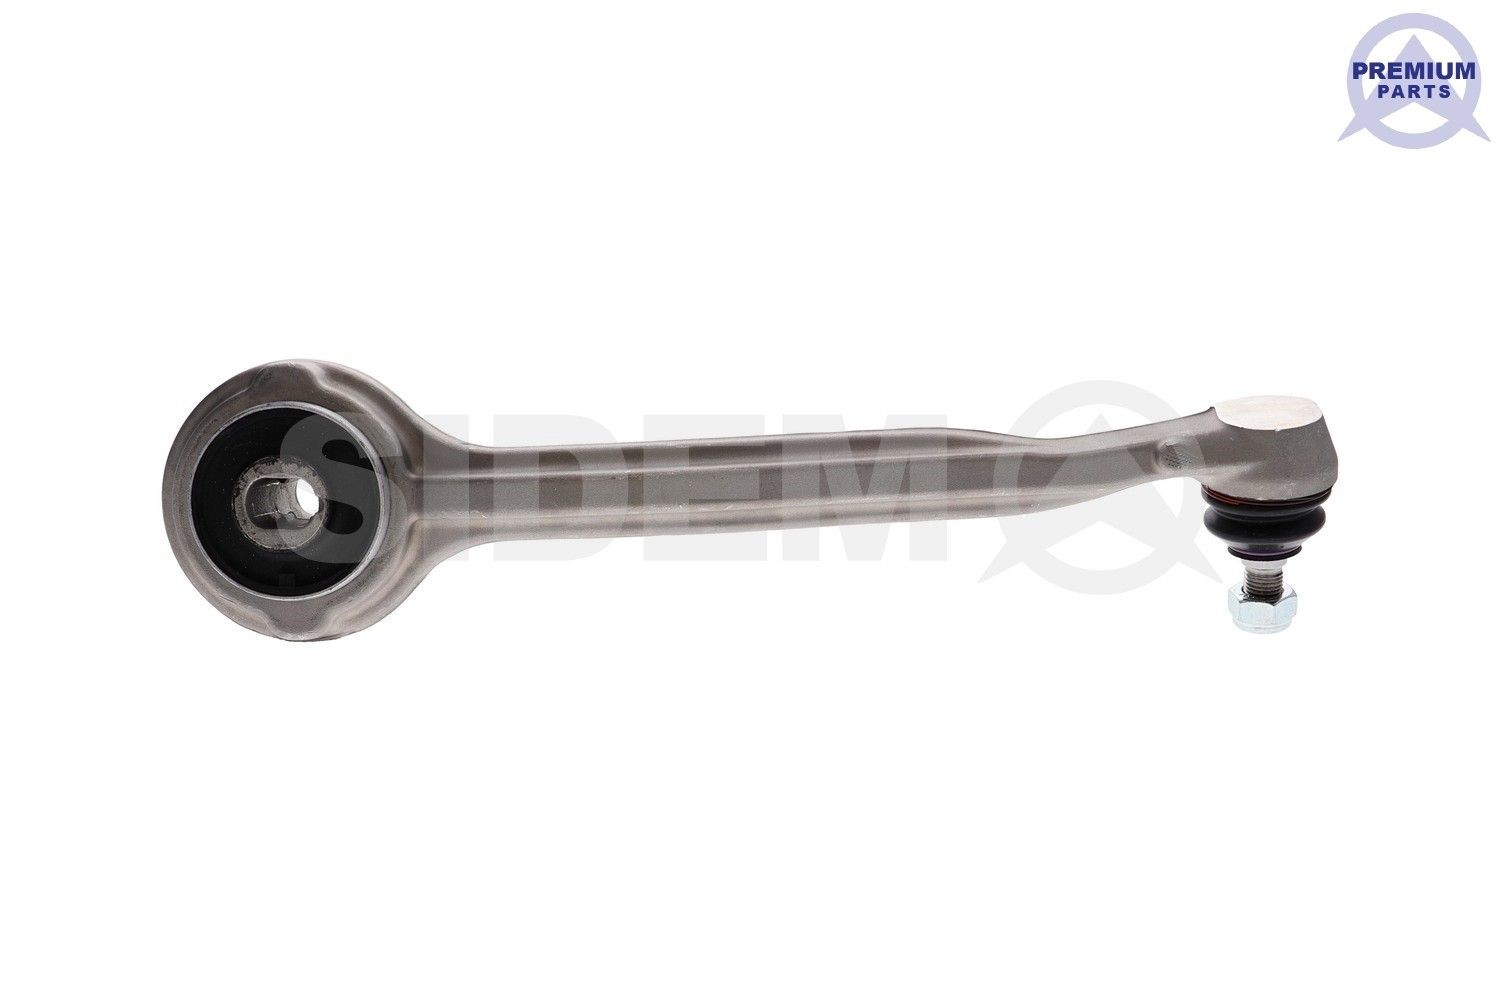 SIDEM 49977 Suspension arm Lower, Front, Front Axle Right, Trailing Arm, Aluminium, Cone Size: 16,3 mm, Push Rod